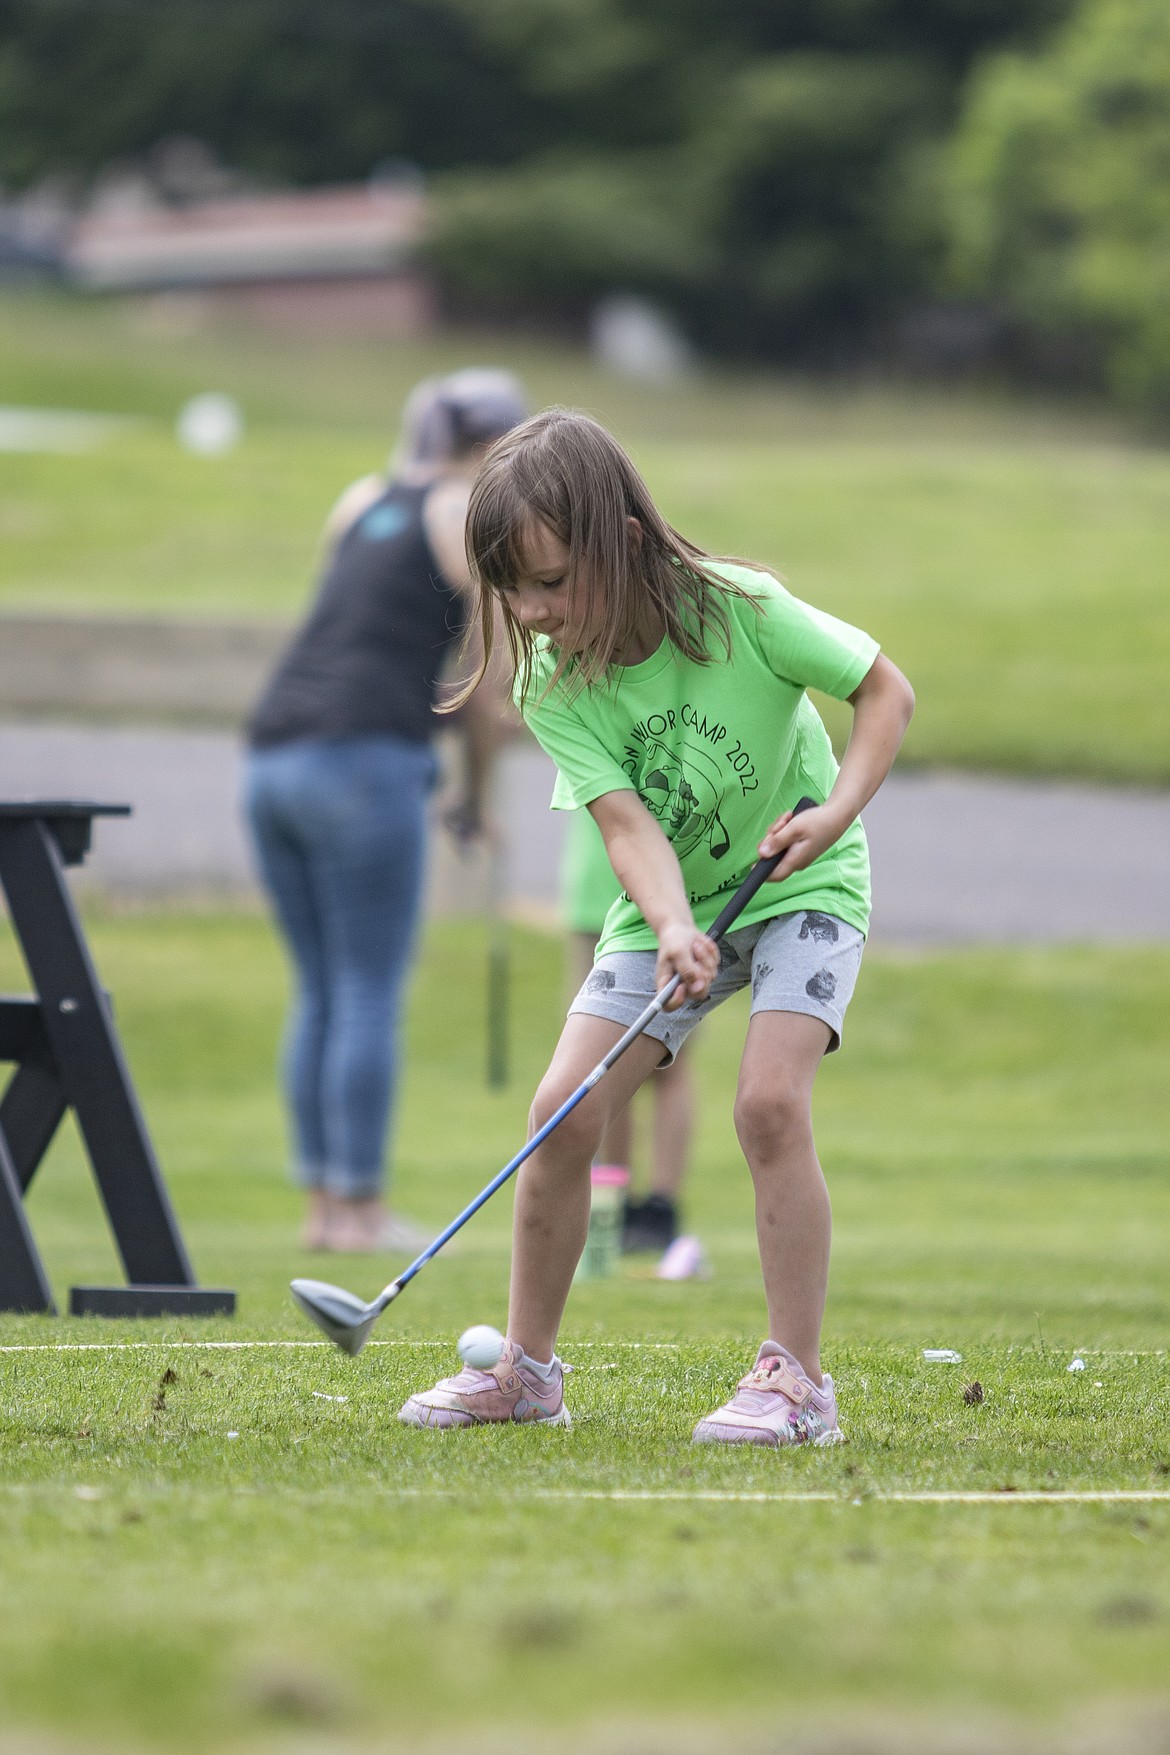 Pearl Bagley makes contact with the ball during the Junior Camp Pitch, Putt, and Drive Competition held at the Polson Bay Golf Course on Friday.